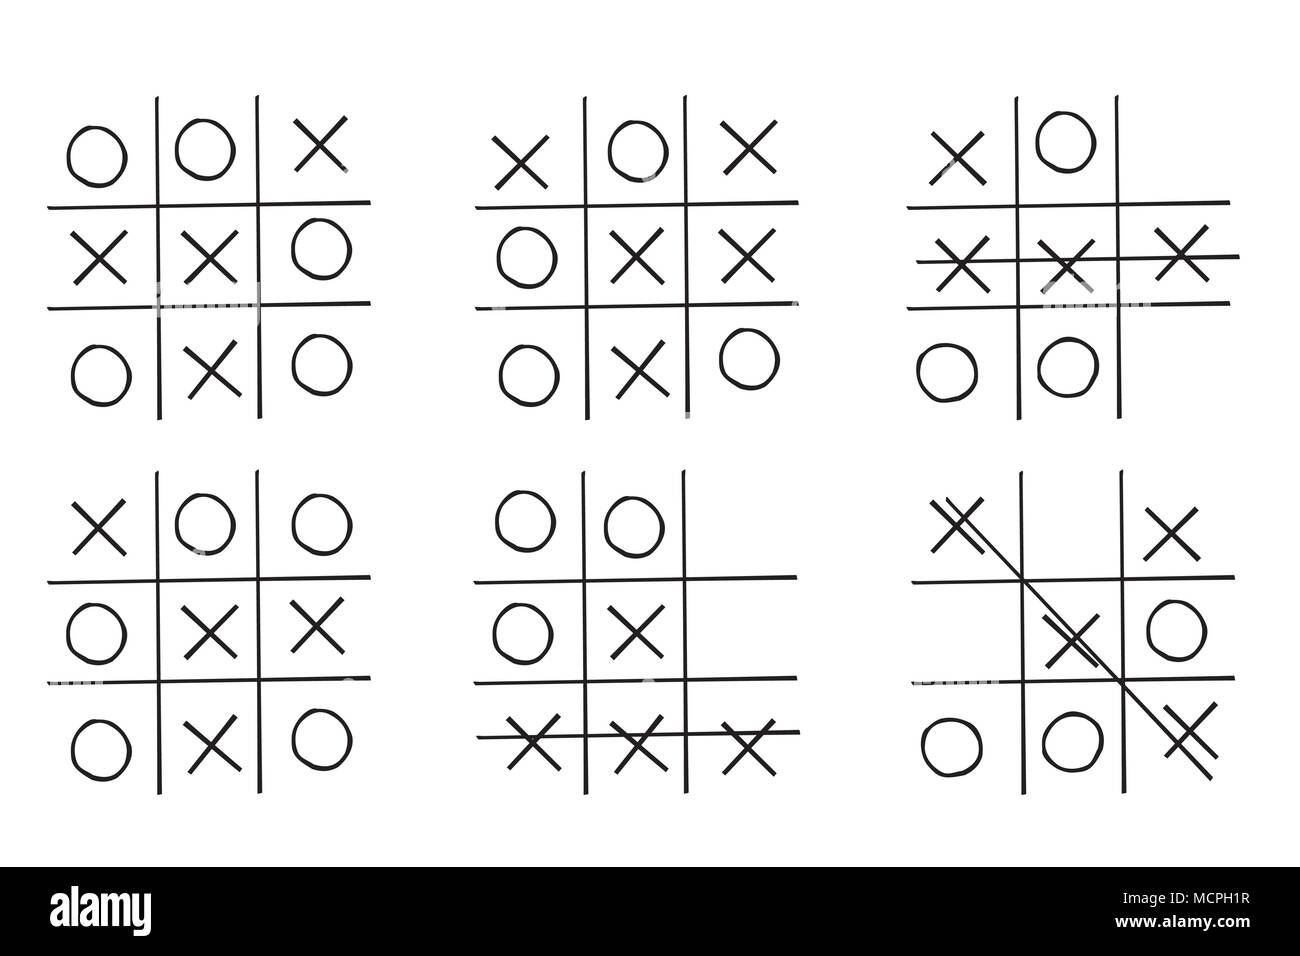 Tic tac toe game isolated on white background Vector Image